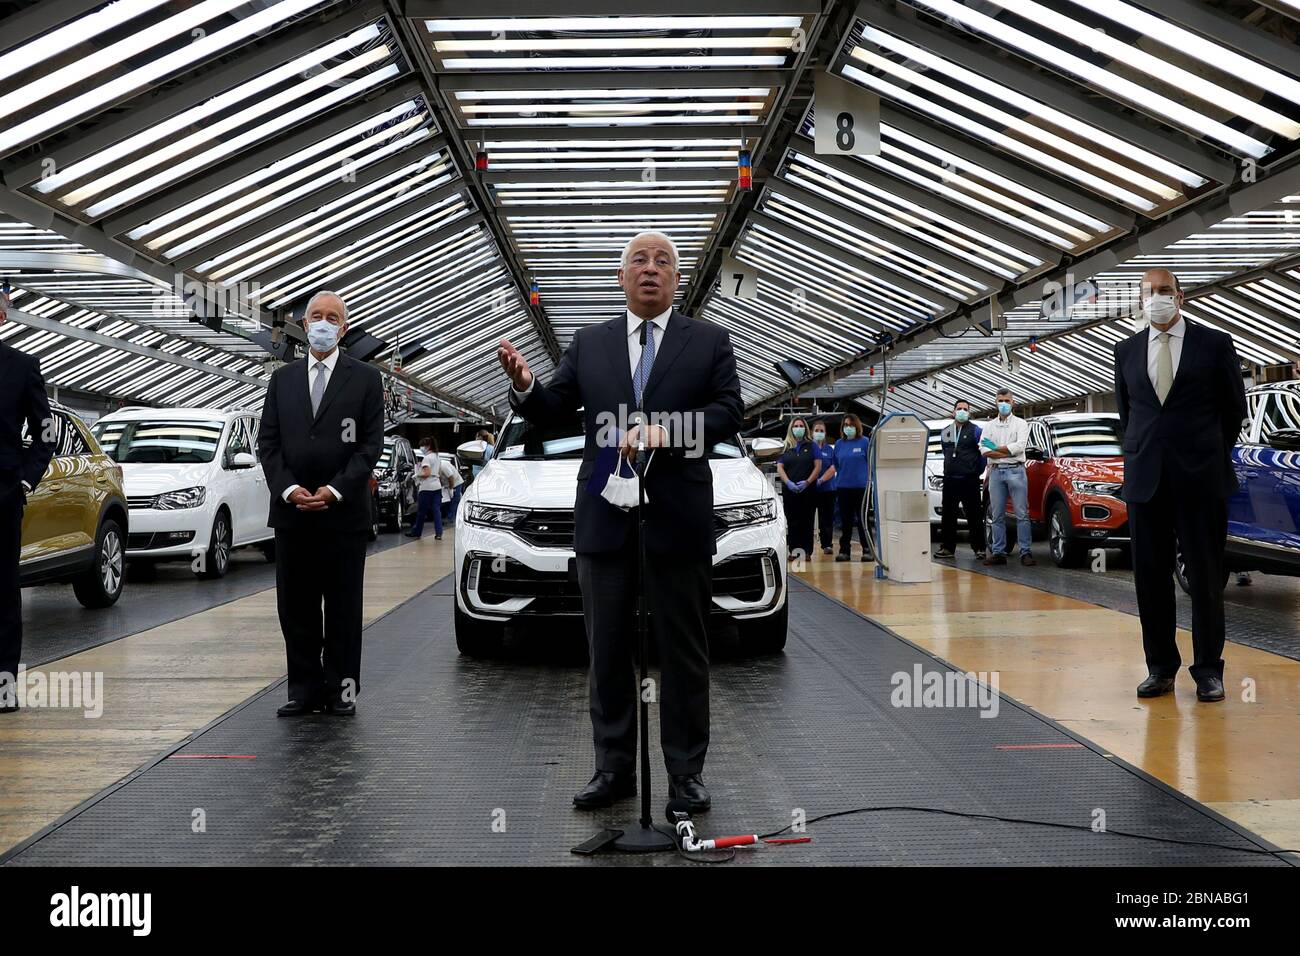 (200514) -- LISBON, May 14, 2020 (Xinhua) -- Portuguese Prime Minister Antonio Costa (C) speaks to reporters during his visit to the Volkswagen Autoeuropa car factory in Palmela, Portugal, May 13, 2020. Portuguese President Marcelo Rebelo de Sousa and Prime Minister Antonio Costa on Wednesday encouraged all industries to restart under strict conditions amid the COVID-19 pandemic, Lusa News Agency reported. After their joint visit to automotive assembly plant Autoeuropa, the two leaders expressed their confidence in the resumption of production for the car producer. (Photo by Pedro Fiuza/Xin Stock Photo